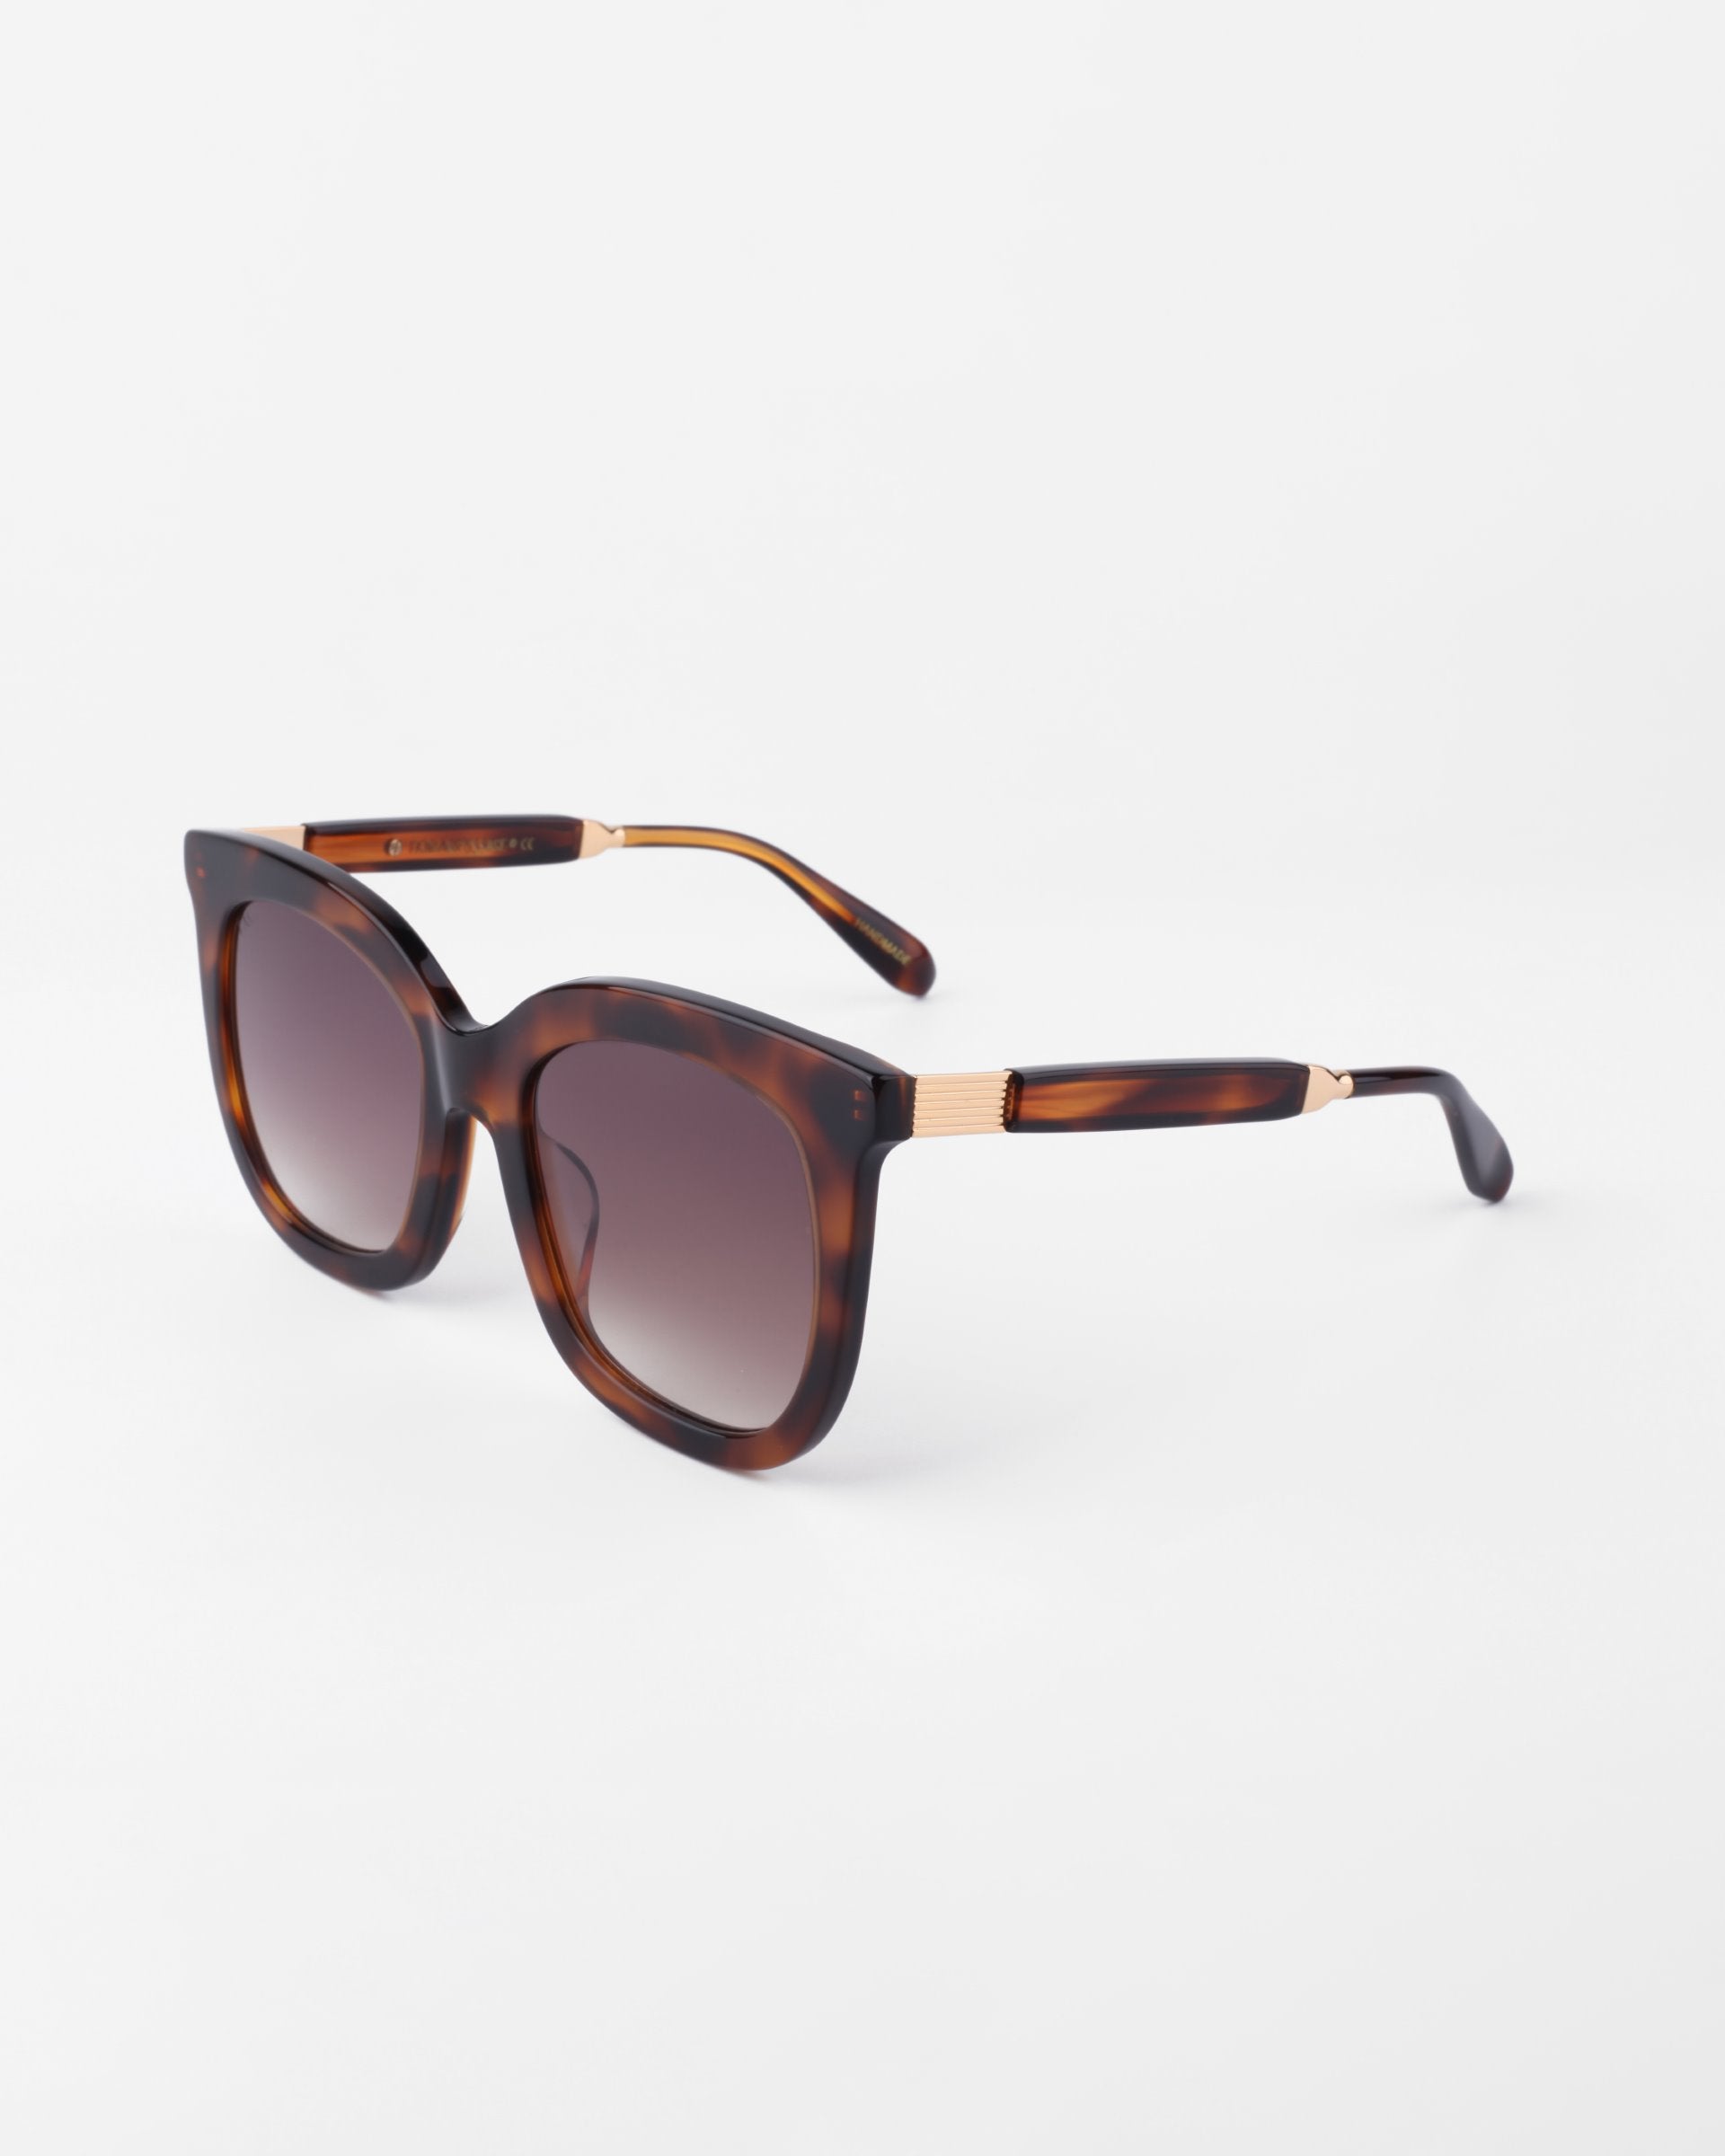 A pair of Riverside square-shaped, dark-tinted sunglasses with a handmade acetate tortoise shell pattern frame and gold-plated detailing on the arms by For Art&#39;s Sake®, displayed against a plain white background.